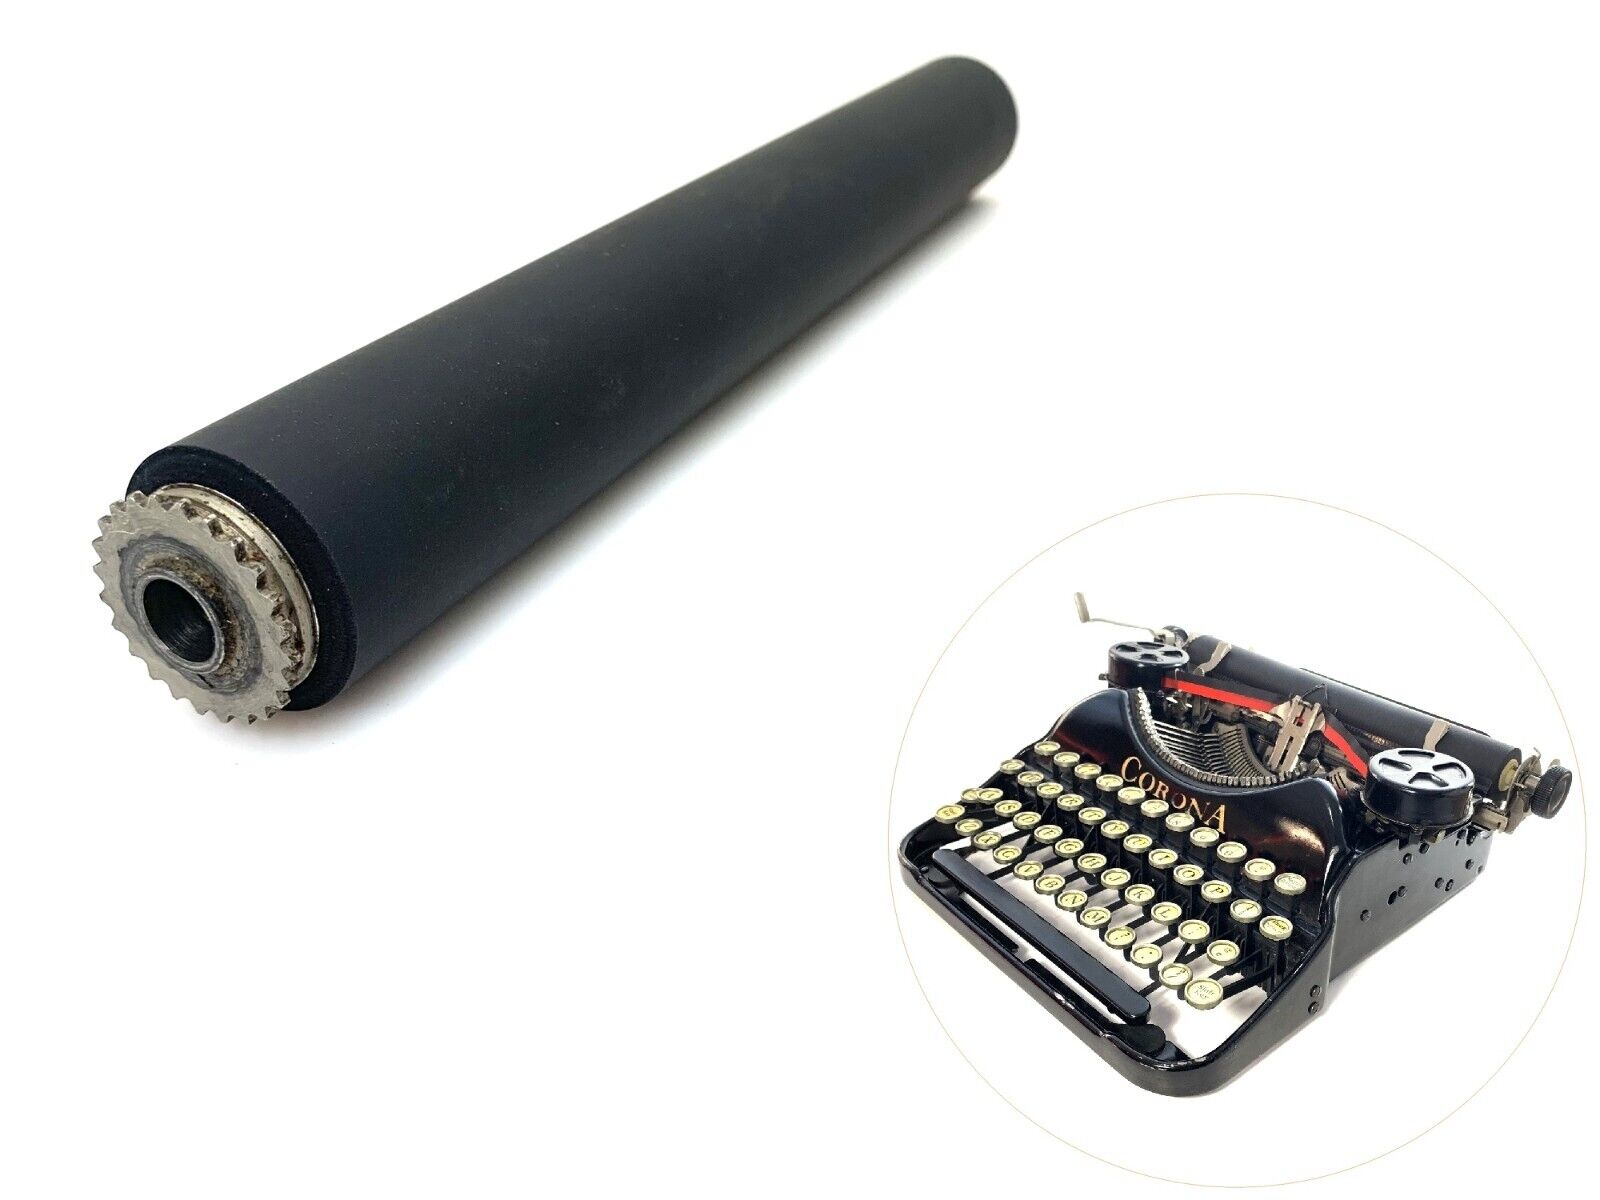 NEW RUBBER Platen for Corona Four Typewriter Antique Portable Roller Carriage